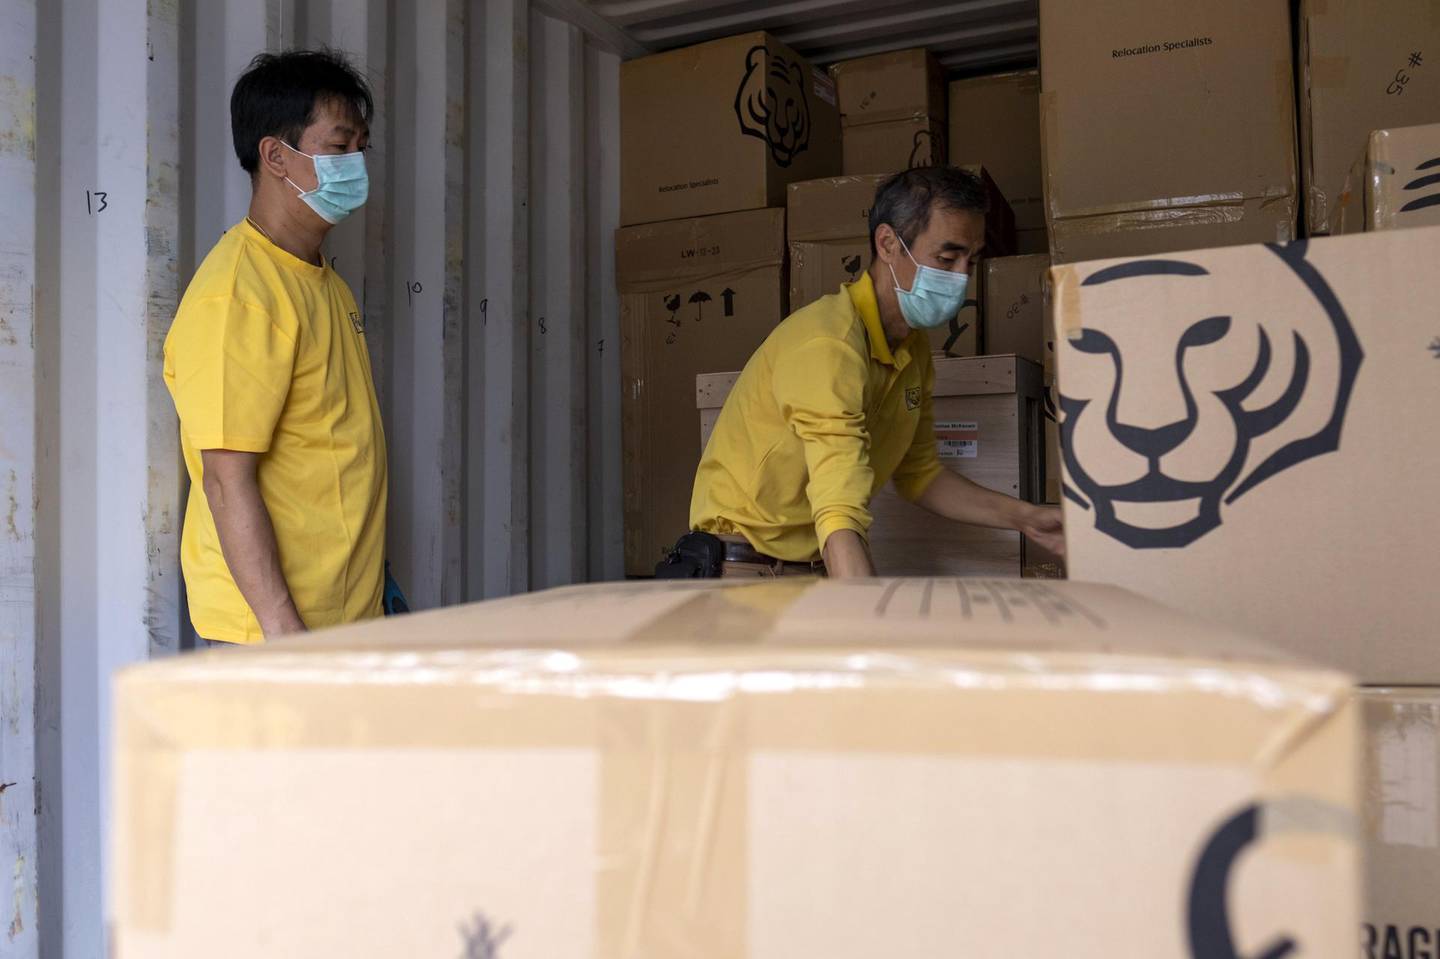 Asia Tigers Group employees arrange boxes inside a shipping container, during a customer's relocation overseas, in Hong Kong, China, on Friday, Feb. 14, 2020. The debate about leaving Hong Kong -- which began for many expats during the unrest last summer and fall -- has taken on a greater urgency with the spread of the coronavirus, which has claimed more than 1,800 people globally, and caused many companies in the financial hub to require employees to work from home.Â Photographer: Justin Chin/Bloomberg via Getty Images